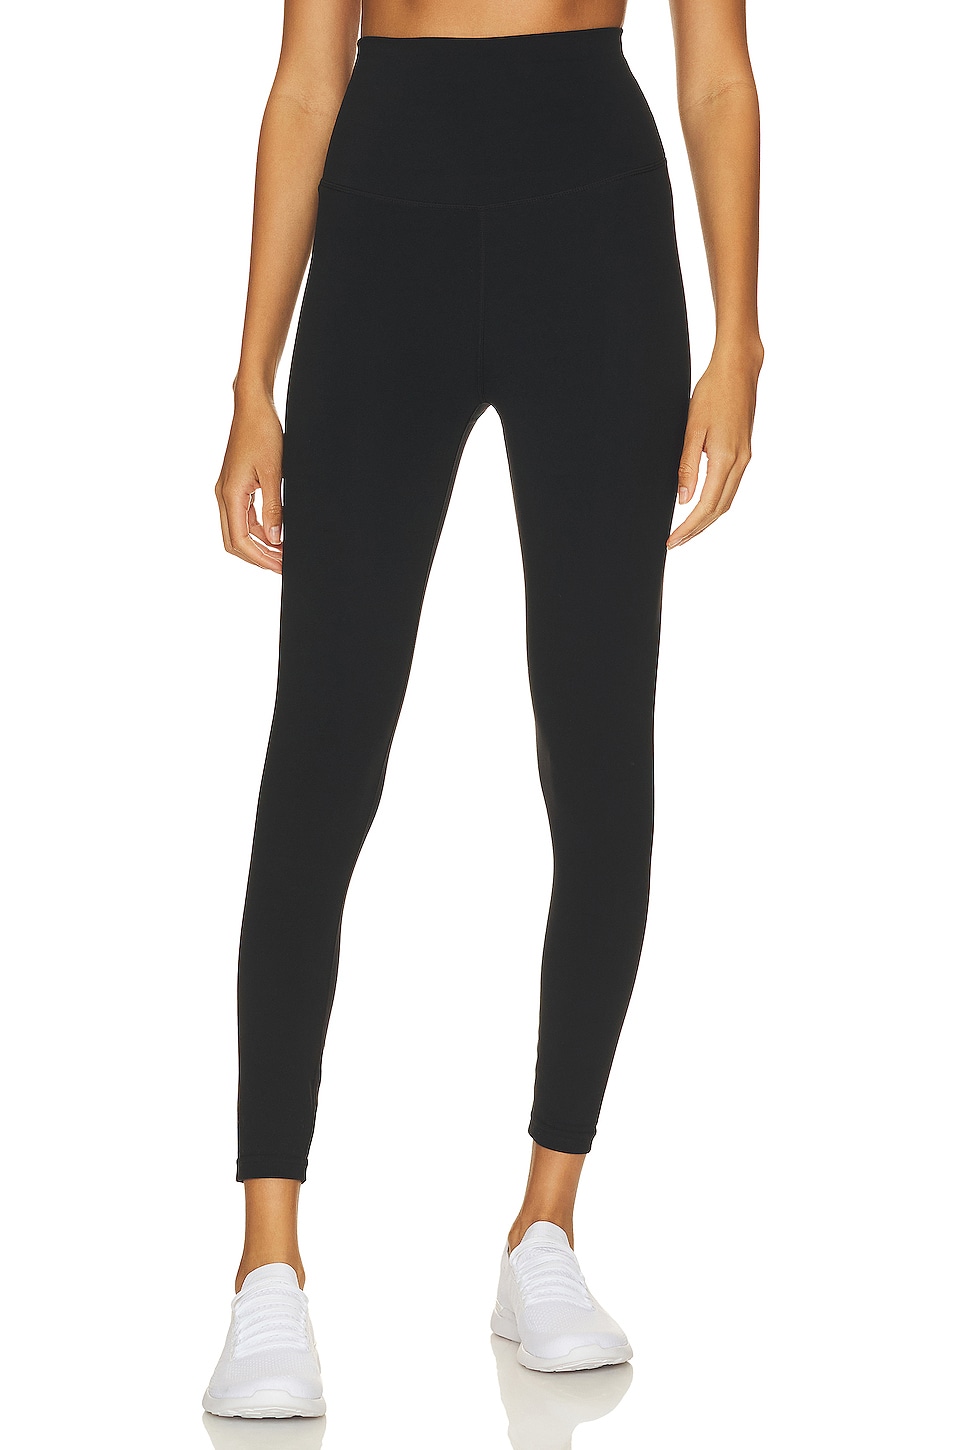 Airweight cropped stretch leggings